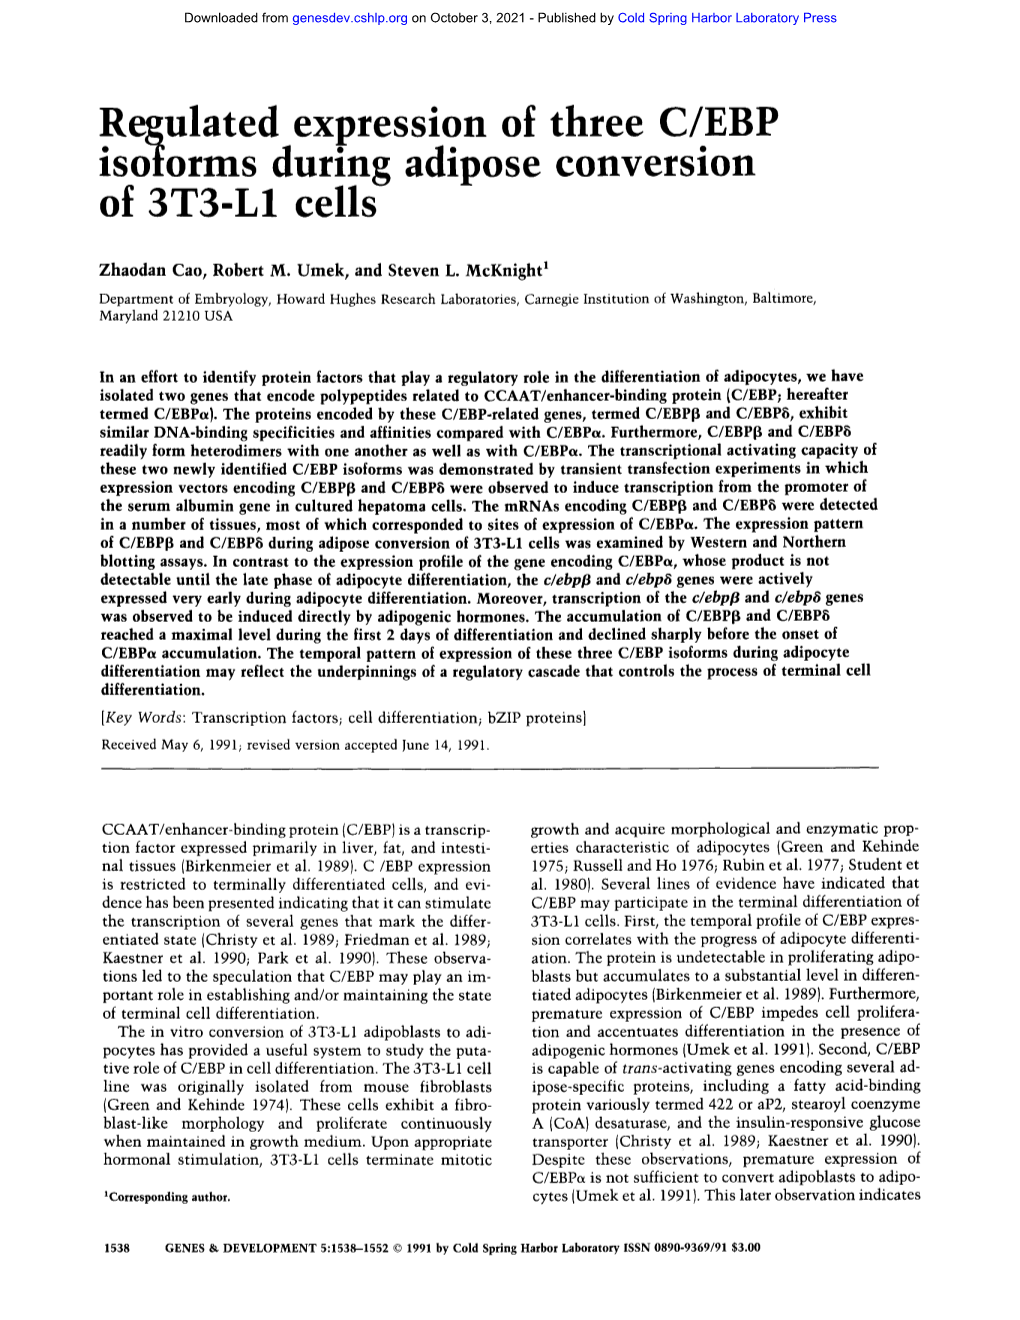 Regulated Expression of Three C/EBP Lsoforms During Adipose Conversion of 3T3-L1 Cells